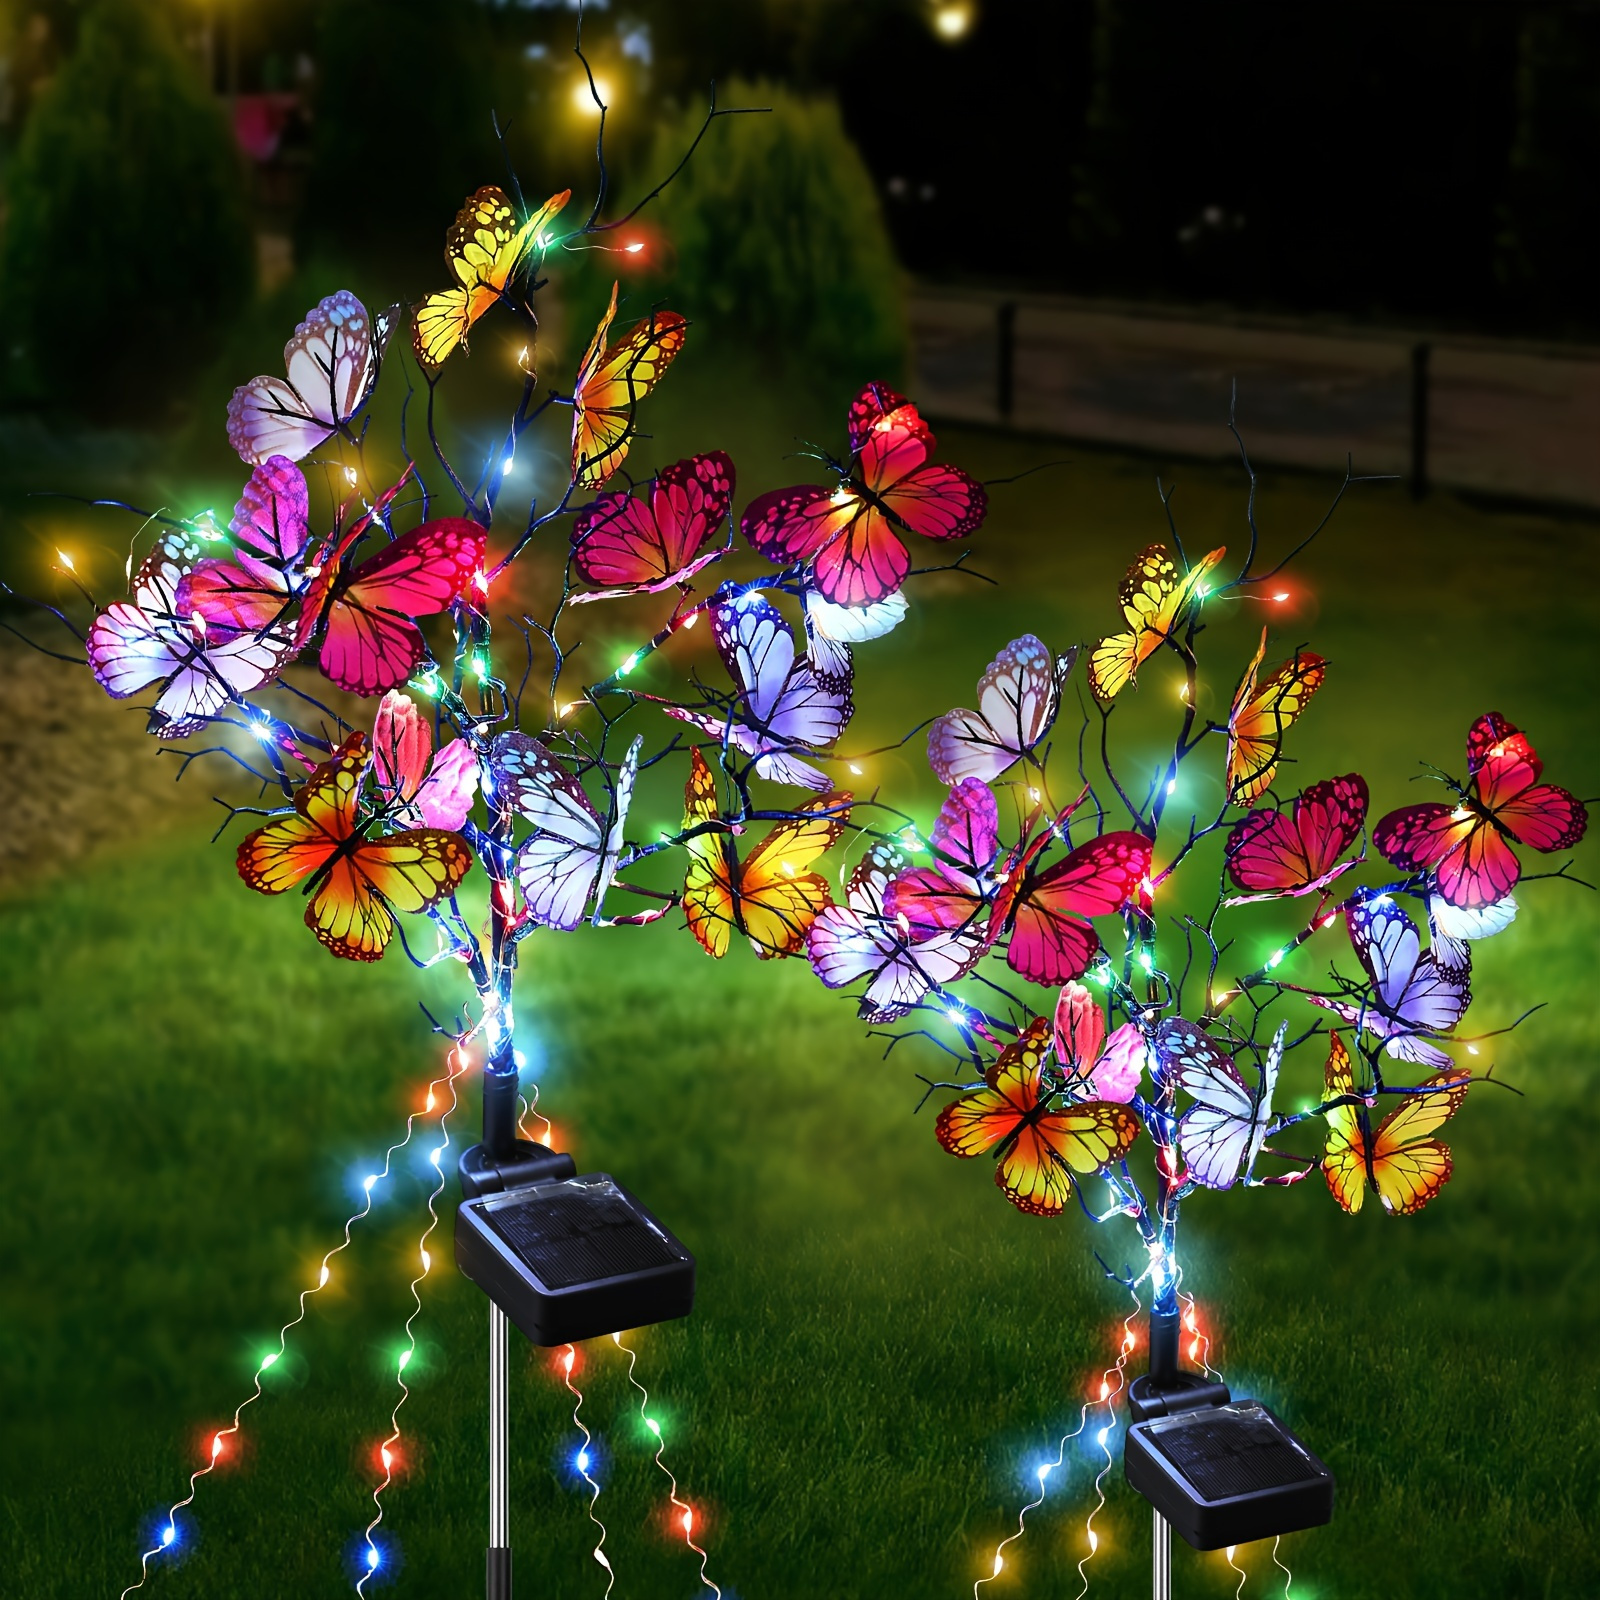 

Diy Styleable, Solar Butterfly Light, With 4 Lights With Butterfly Color Light, Garden Decorative Light, Lawn Light